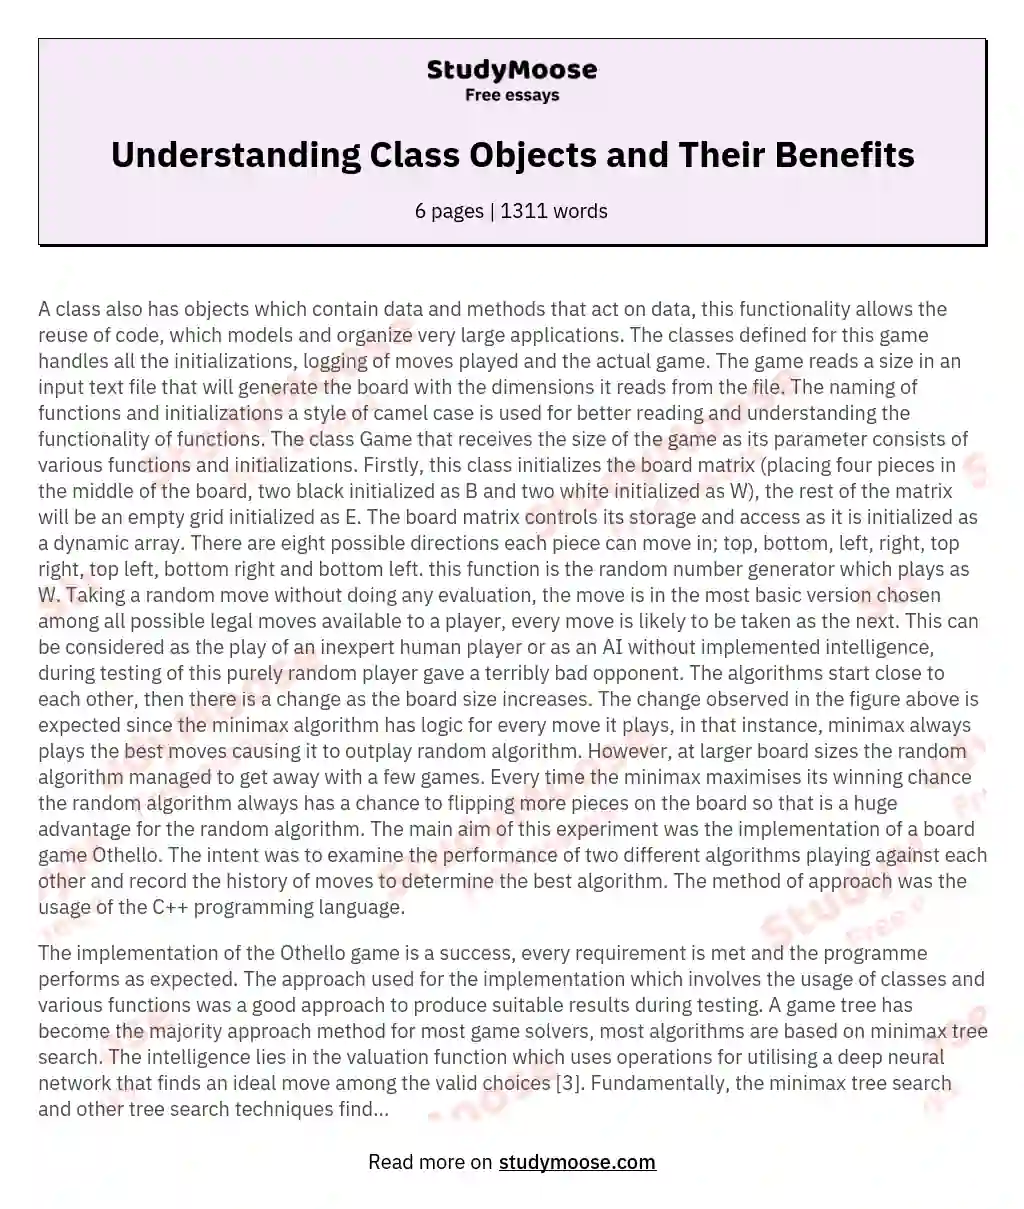 Understanding Class Objects and Their Benefits essay